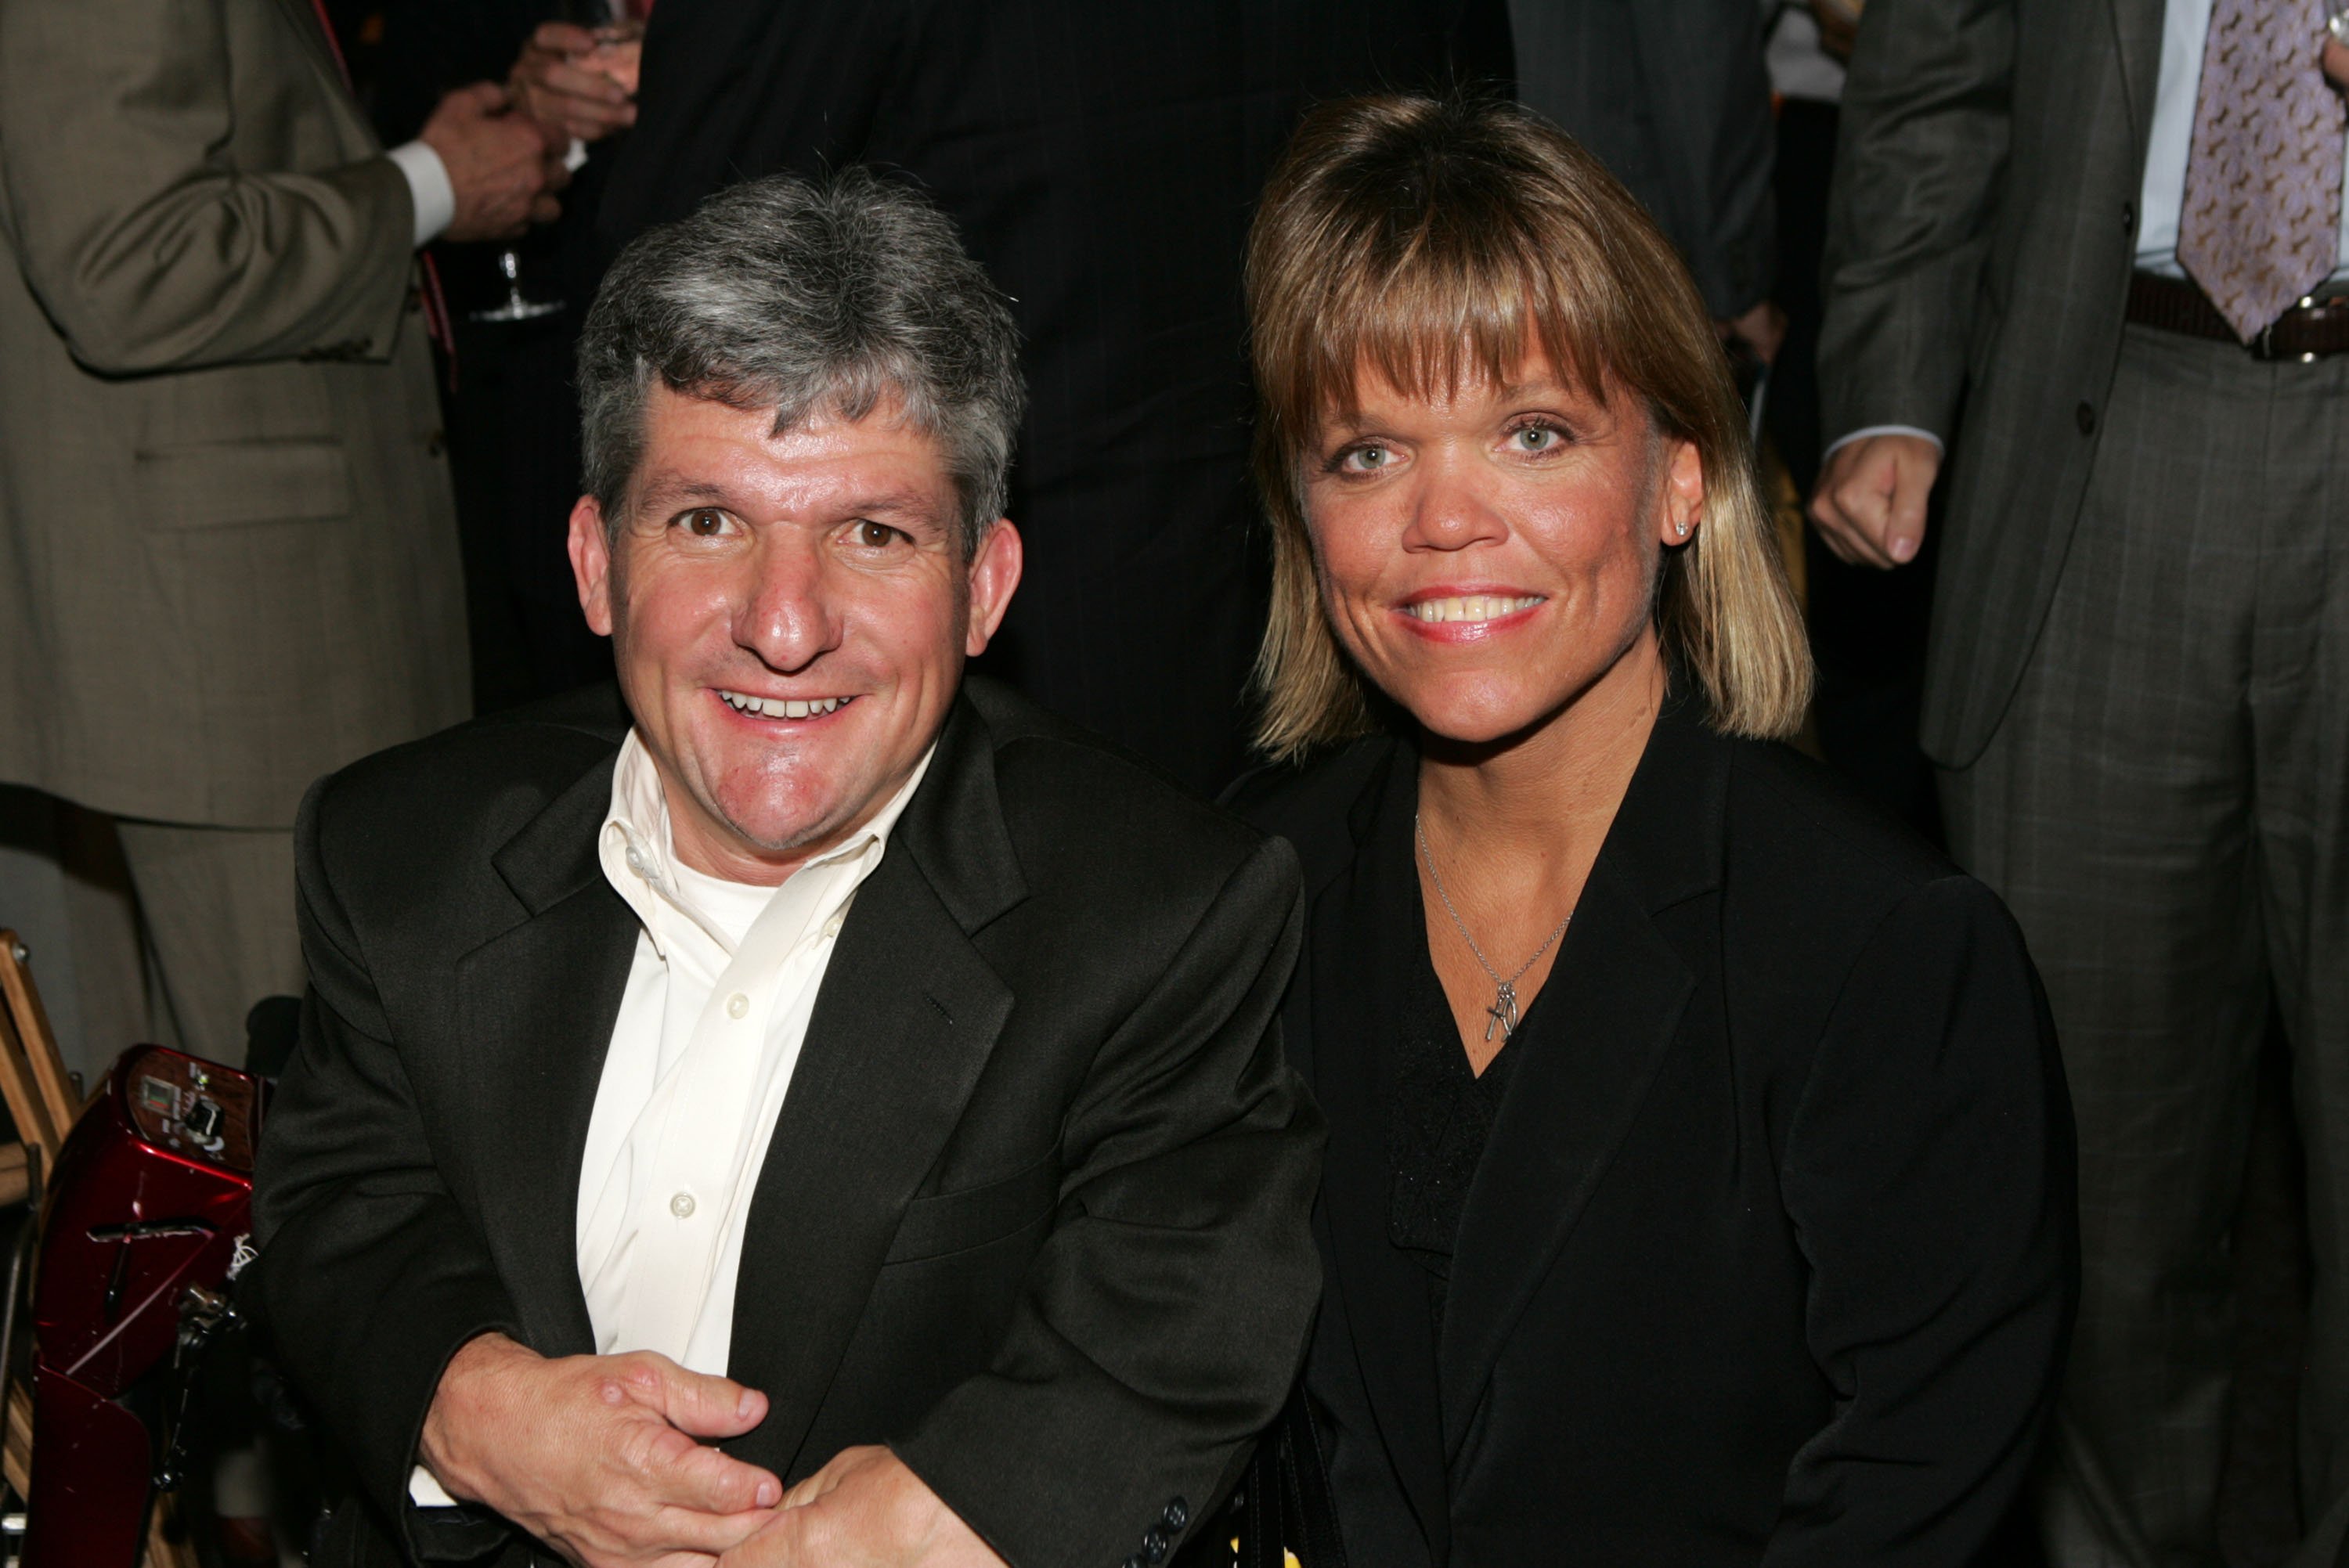 Matt and Amy Roloff attend the Discovery Upfront Presentation NY - Talent Images at the Frederick P. Rose Hall on April 23, 2008, in New York City. | Source: Getty Images.